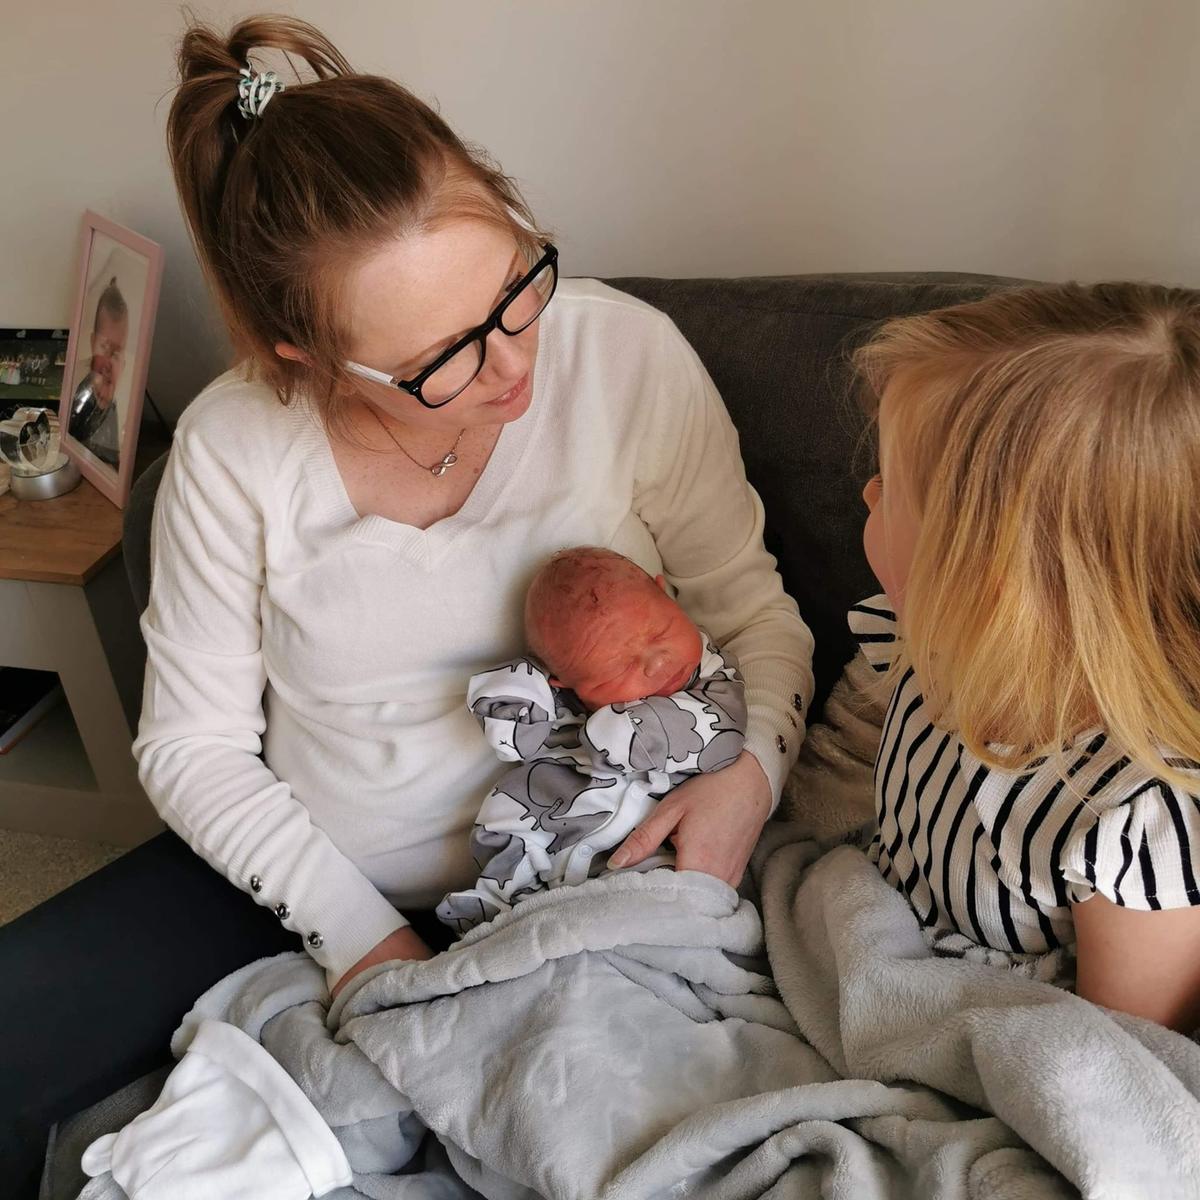 “At first we didn’t think anything of it but then his feeding started to drop and it got to the point where he was taking less than one ounce of milk," Laura said. (Caters News)